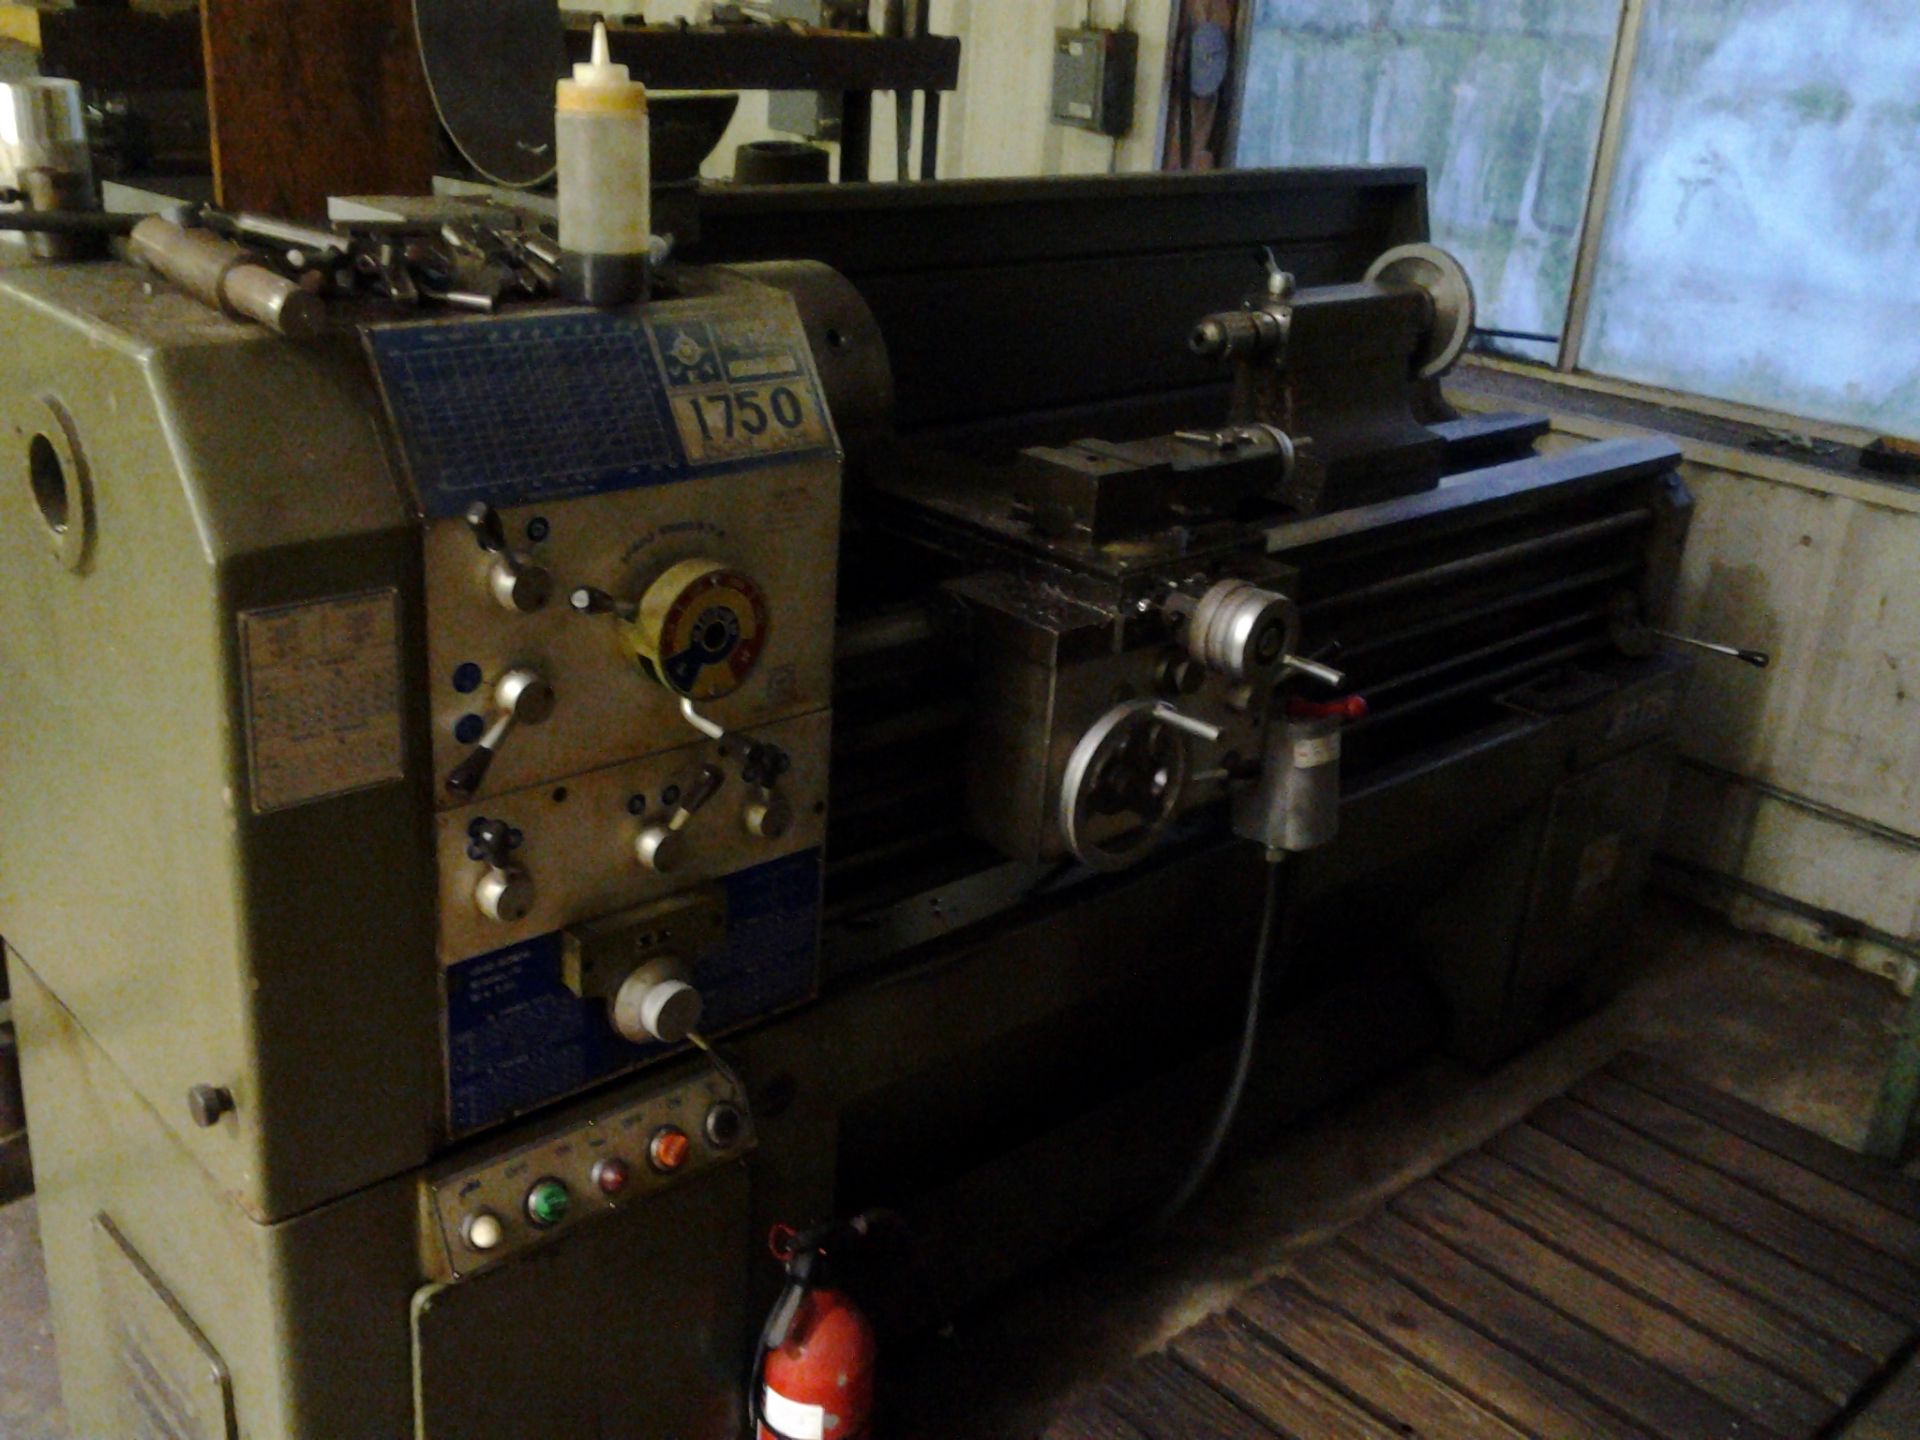 Jet 1750 engine lathe 3 jaw, 4 jaw taper tapping